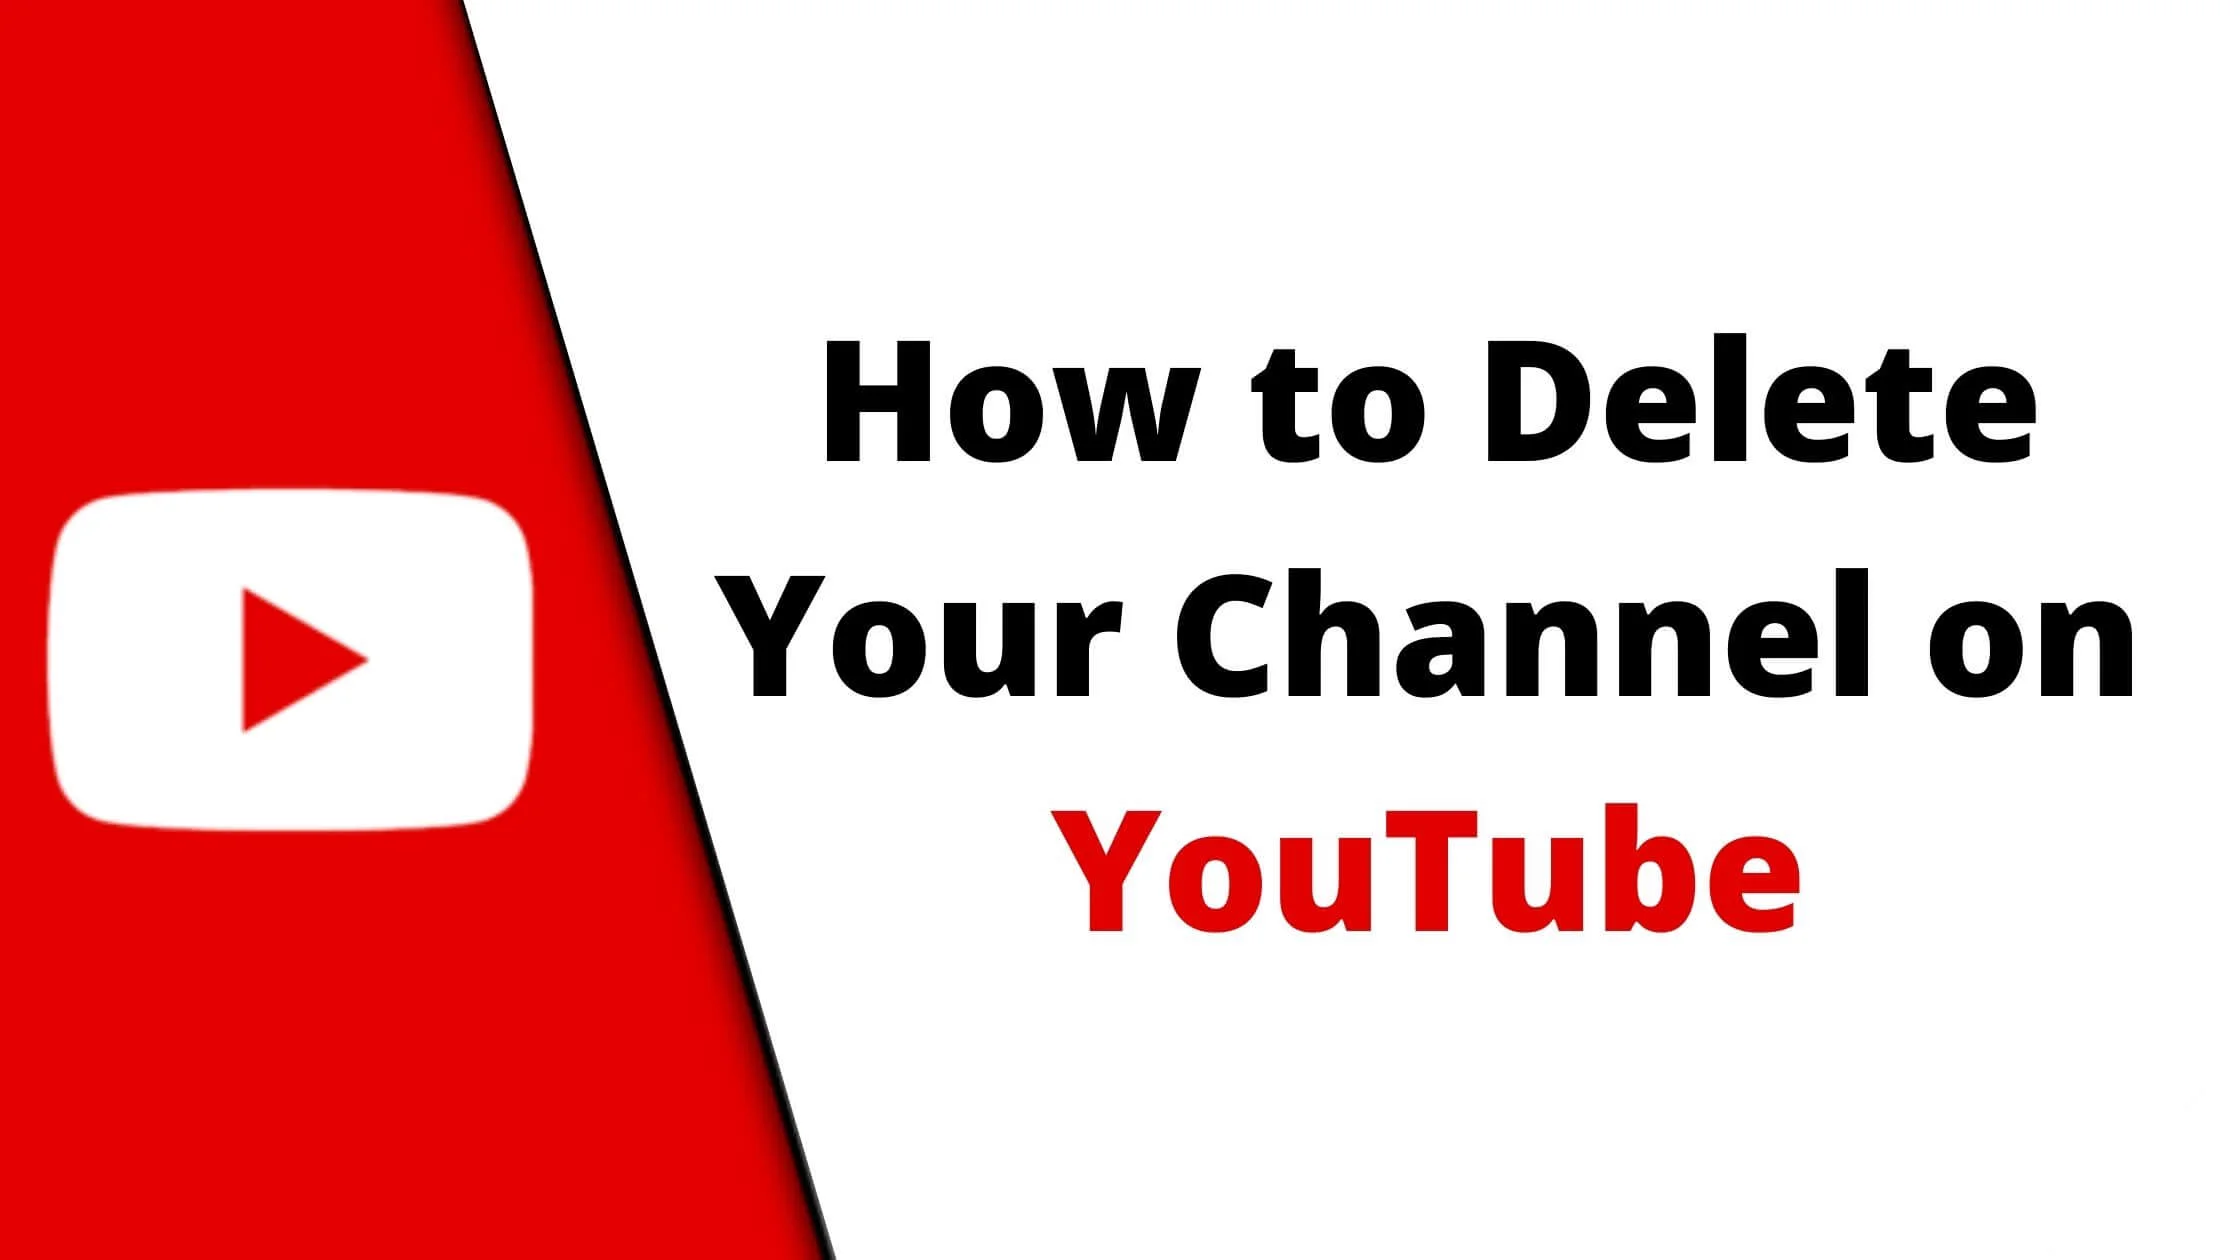 How to Delete Your Channel on YouTube